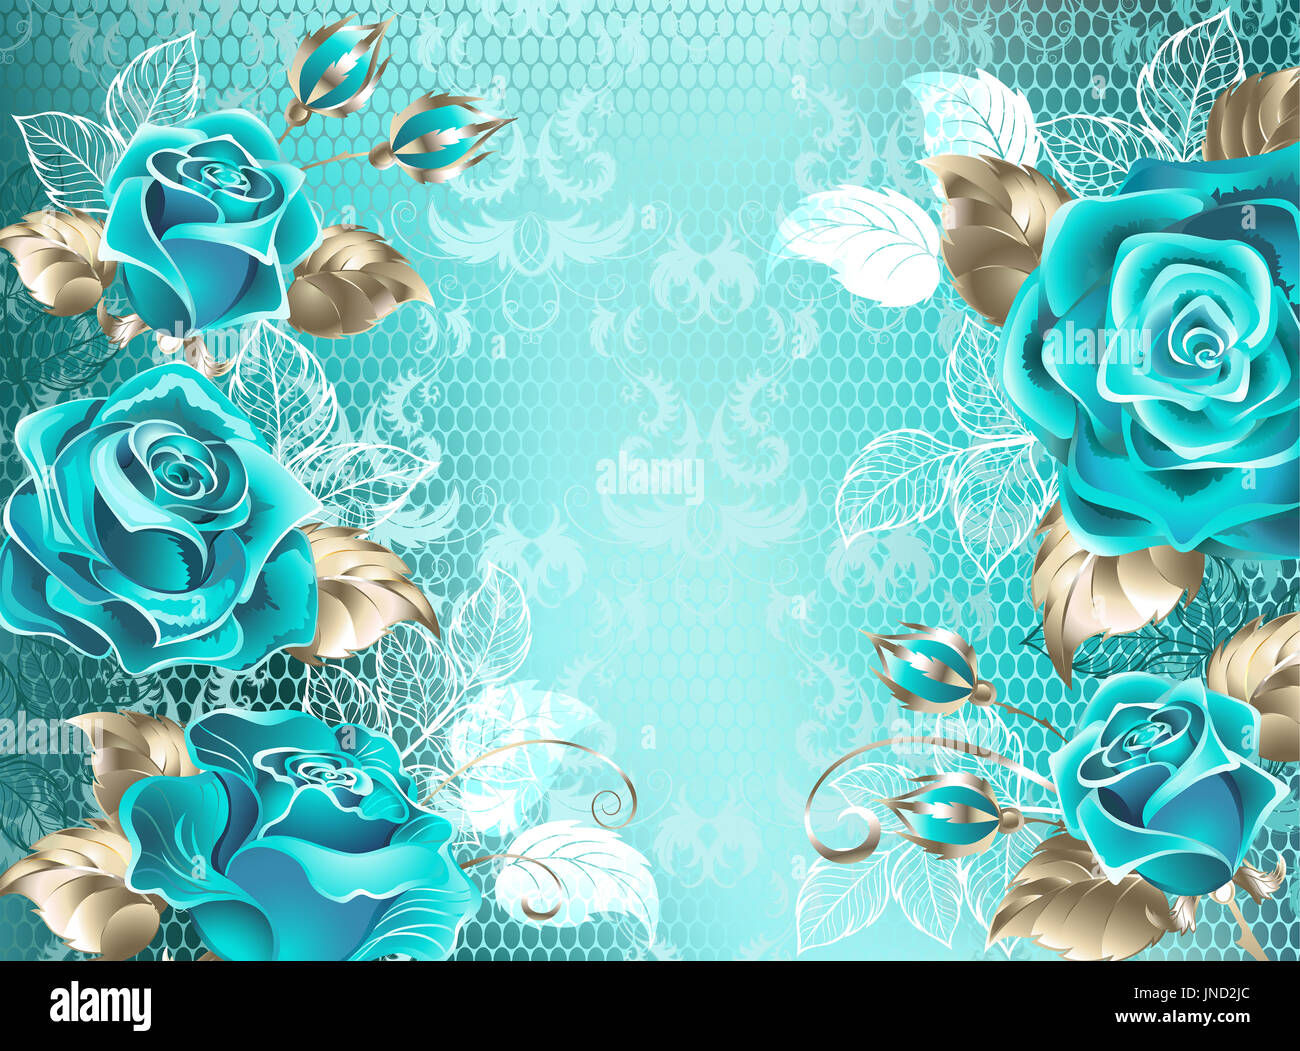 Turquoise lace background with turquoise roses, decorated with leaves of  white lace and white gold. Fashionable color. Turquoise roses. White gold.  Bl Stock Photo - Alamy